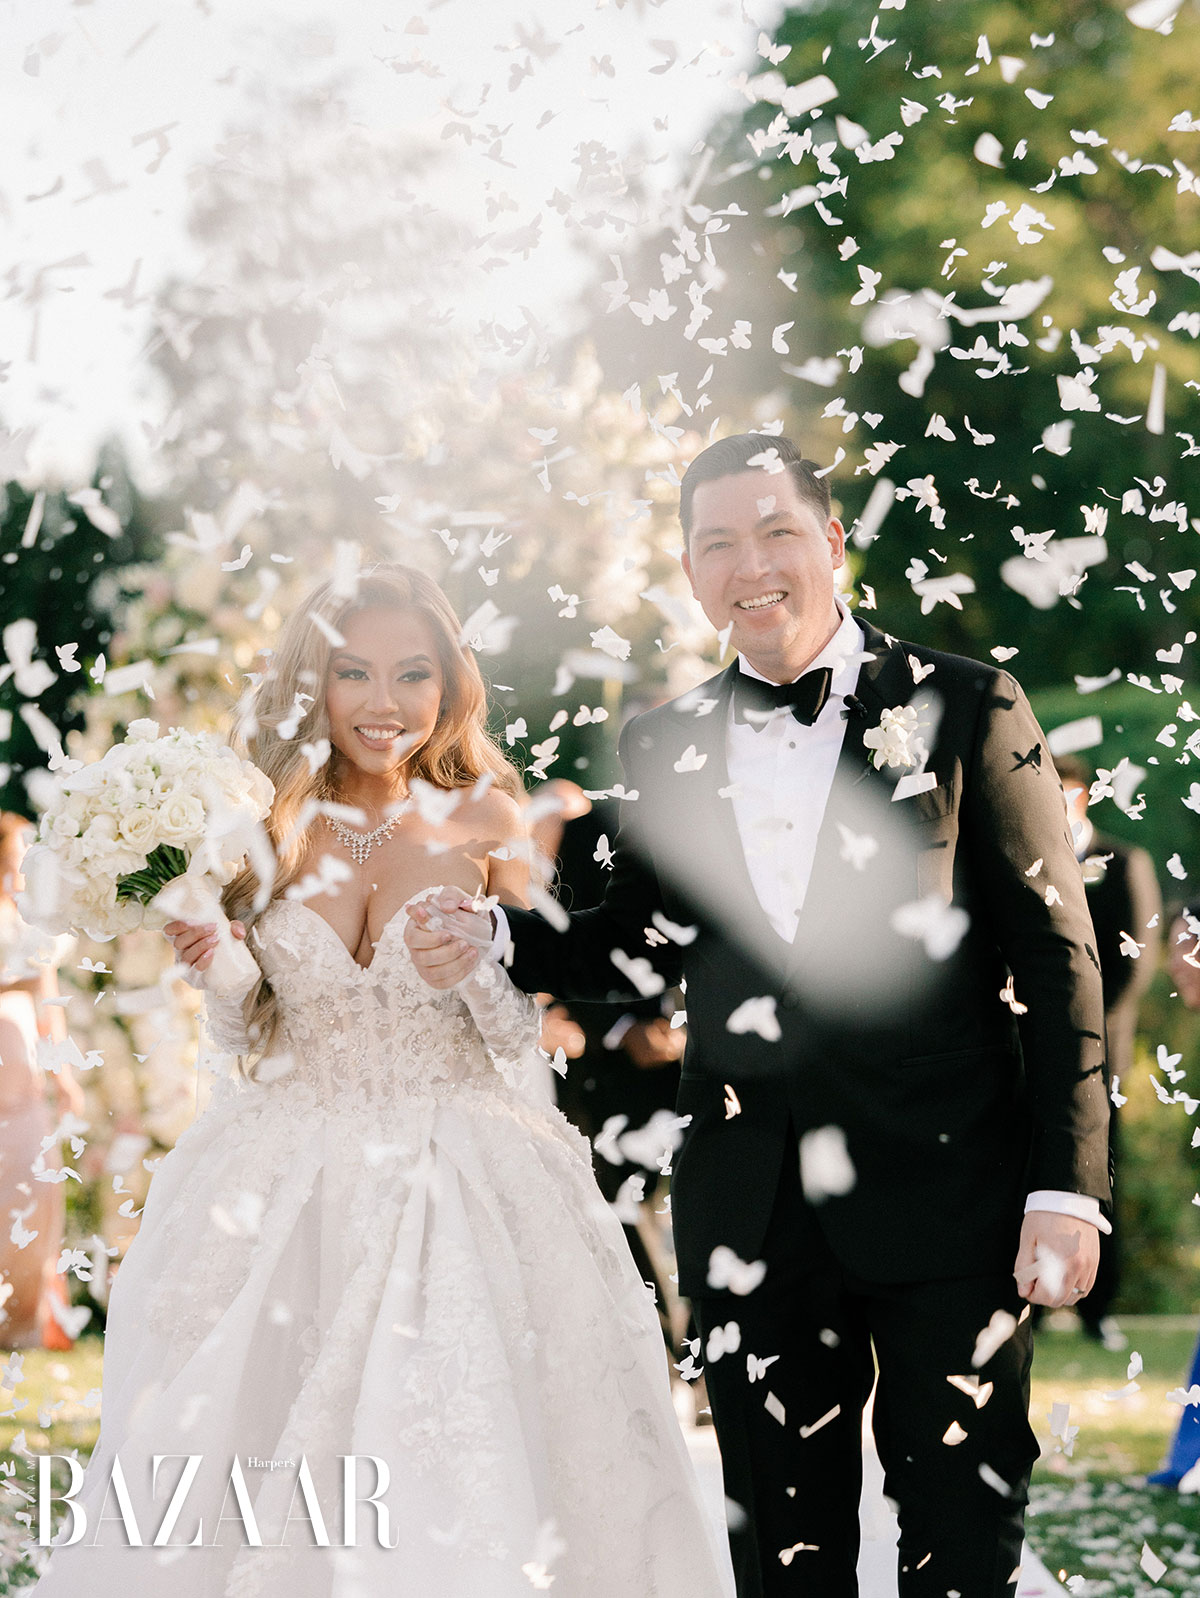 Andrew & Adrianna Lang's Fairytale Wedding at Oheka Castle